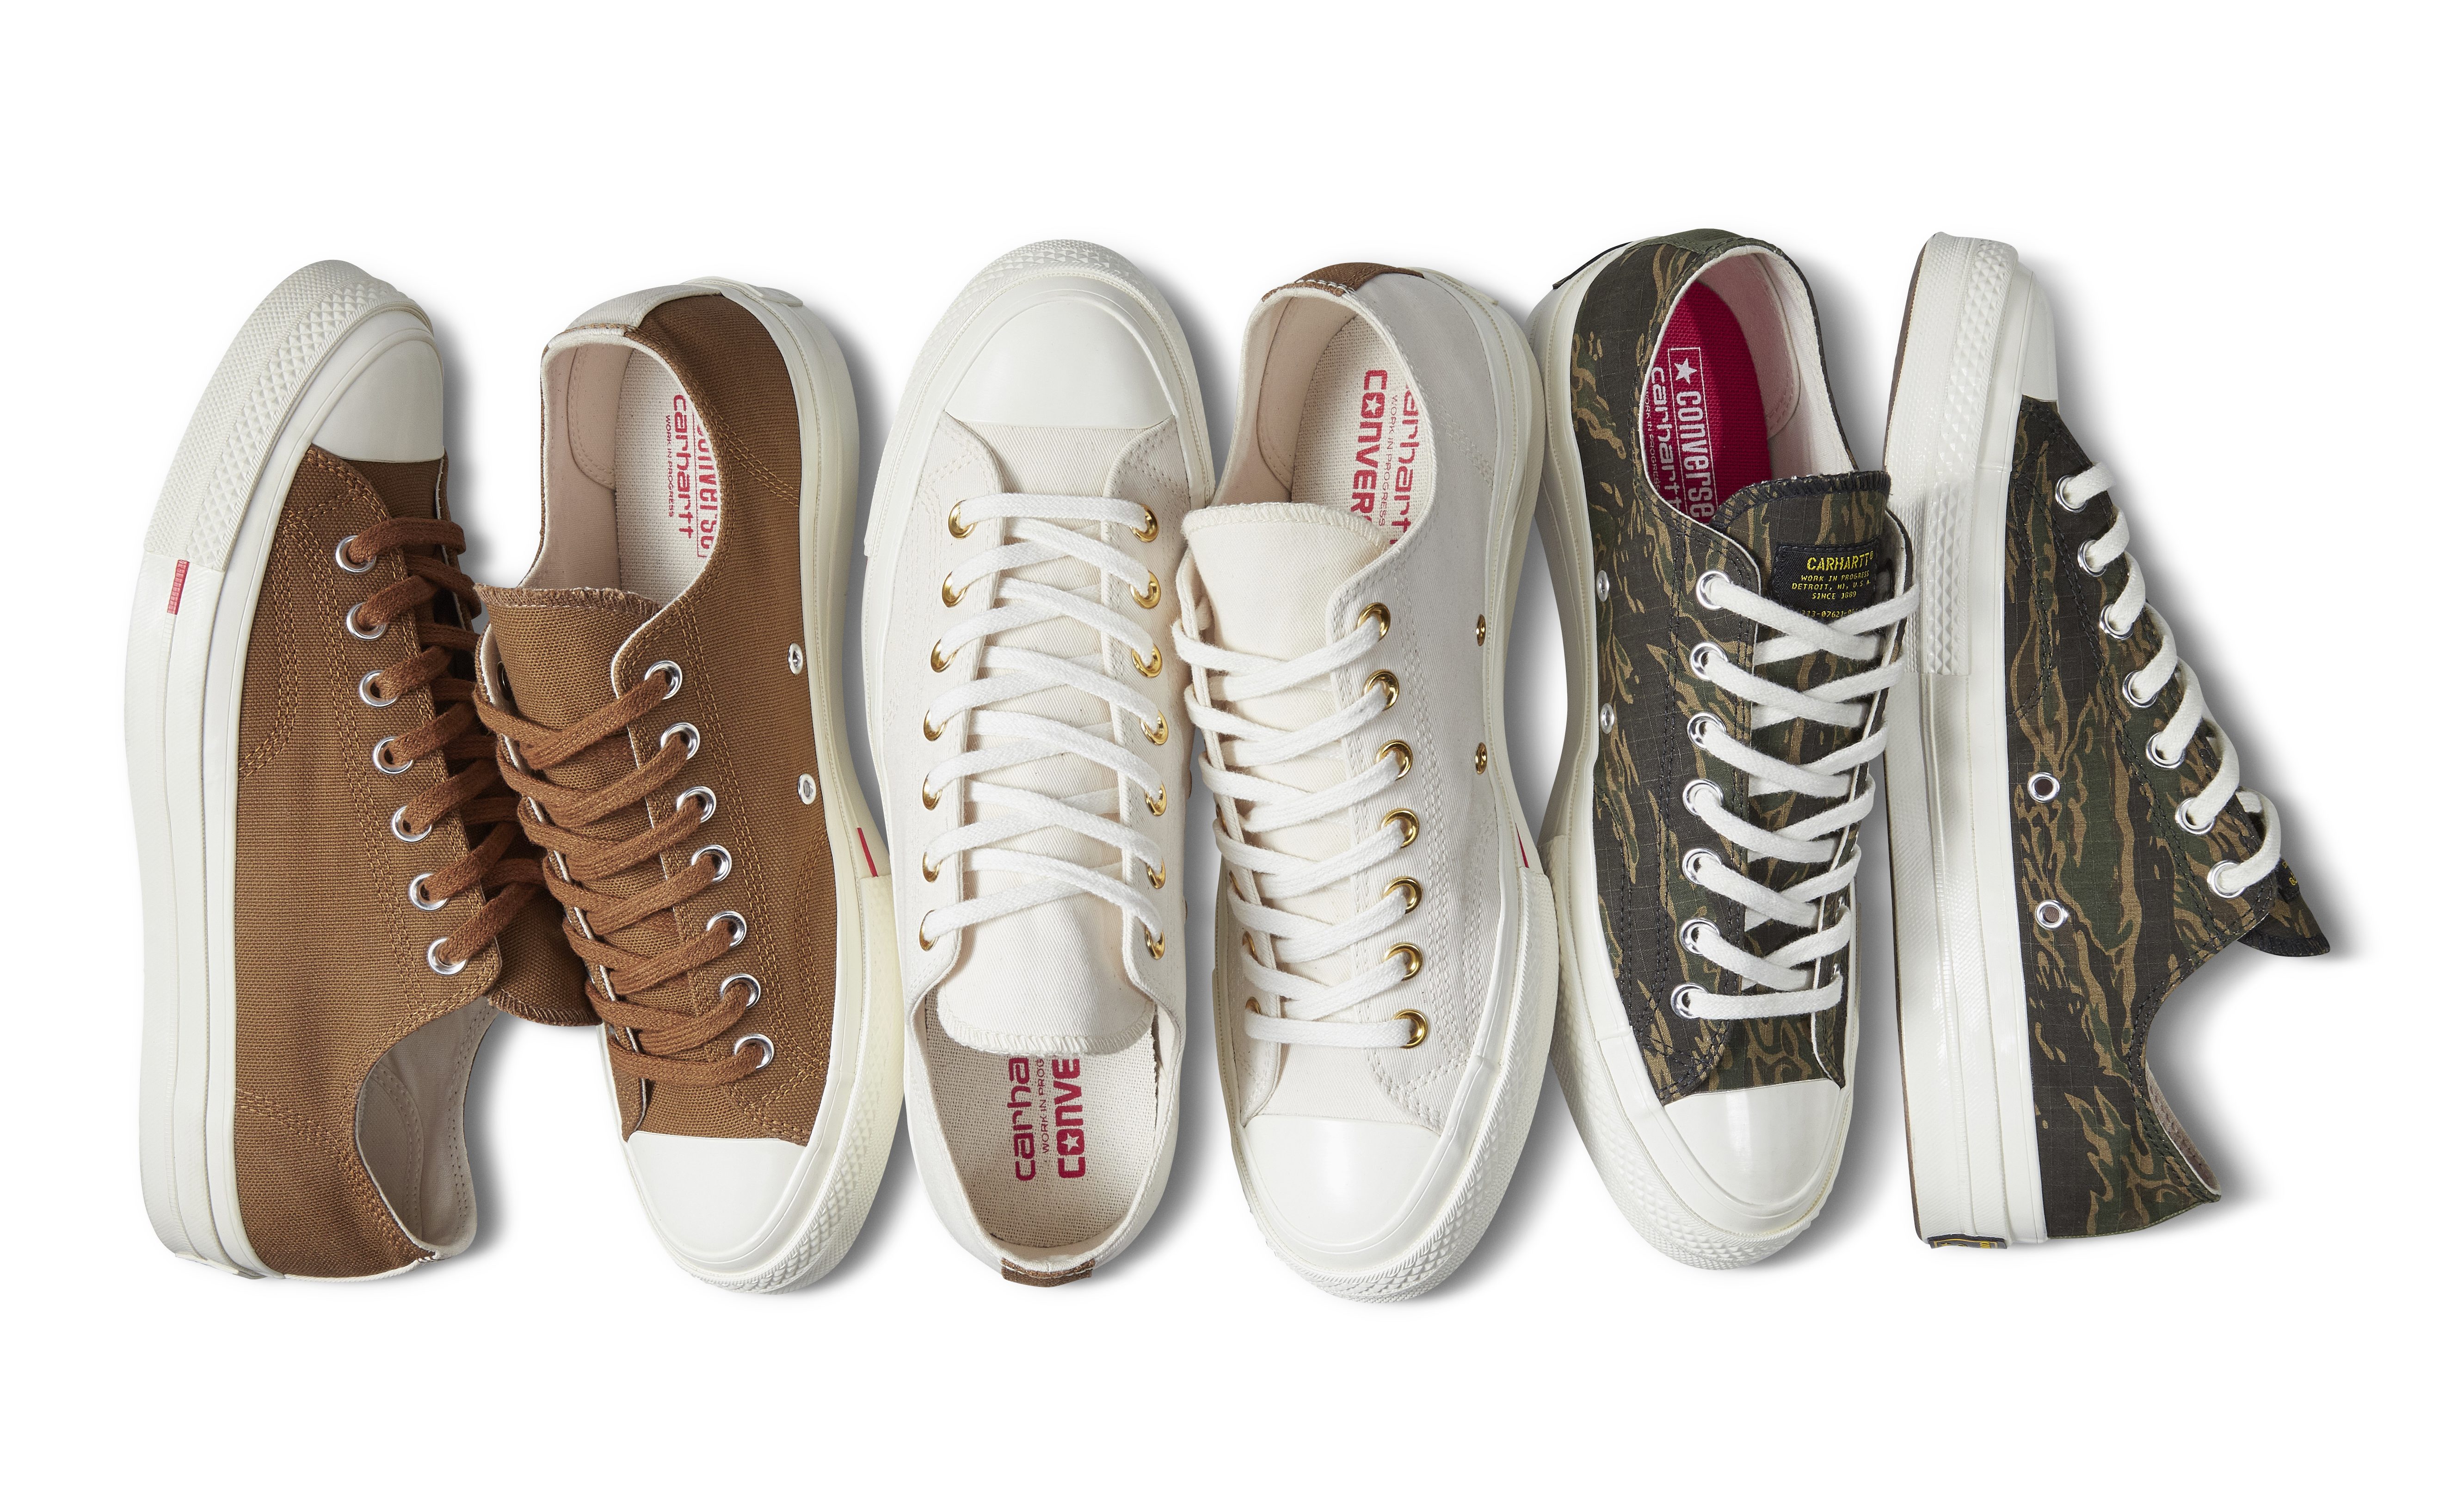 Converse x Carhartt WIP collab on the 